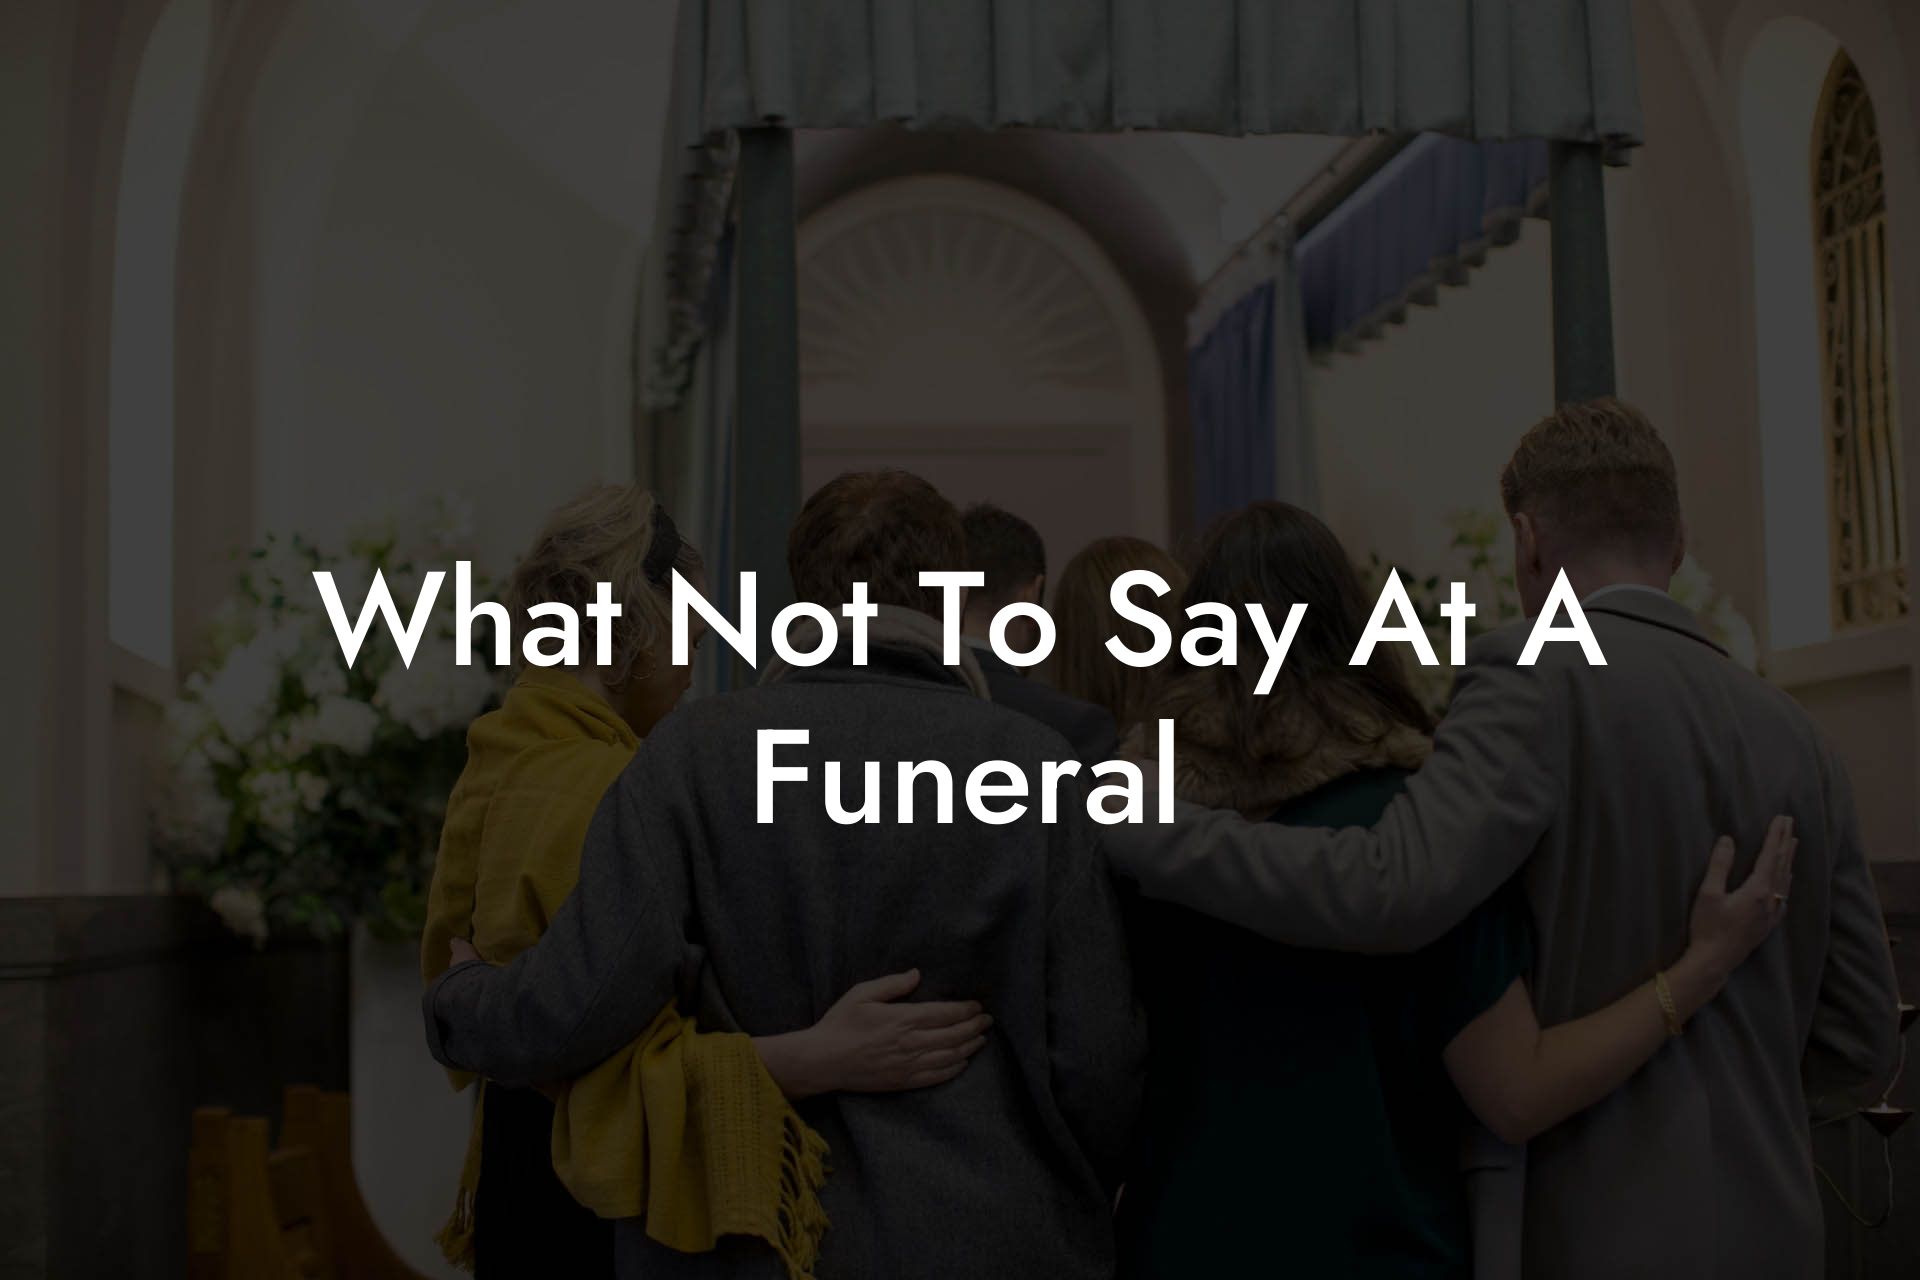 What Not To Say At A Funeral